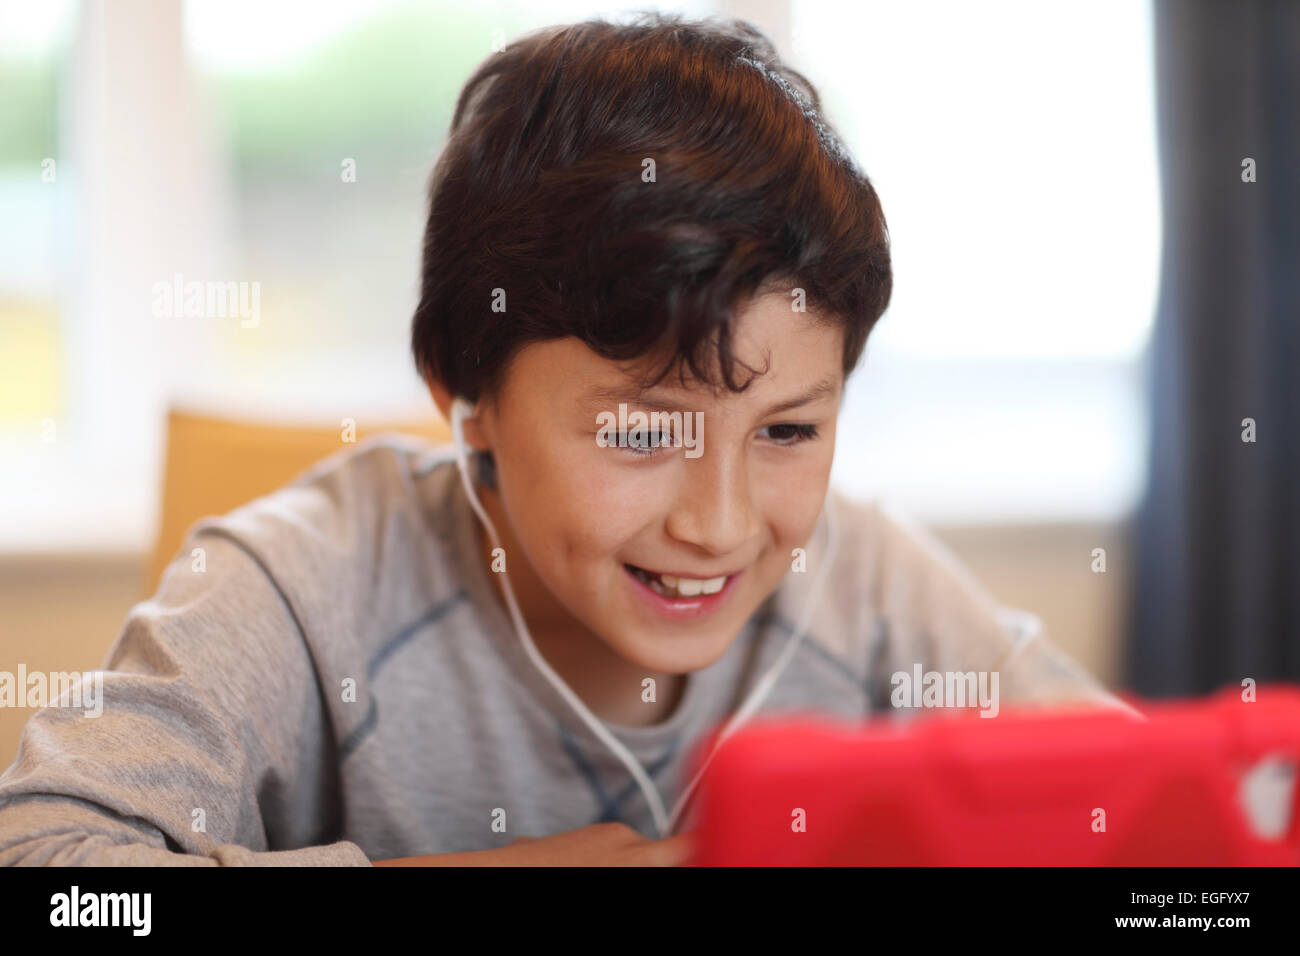 Young smiling boy playing with tablet computer Stock Photo